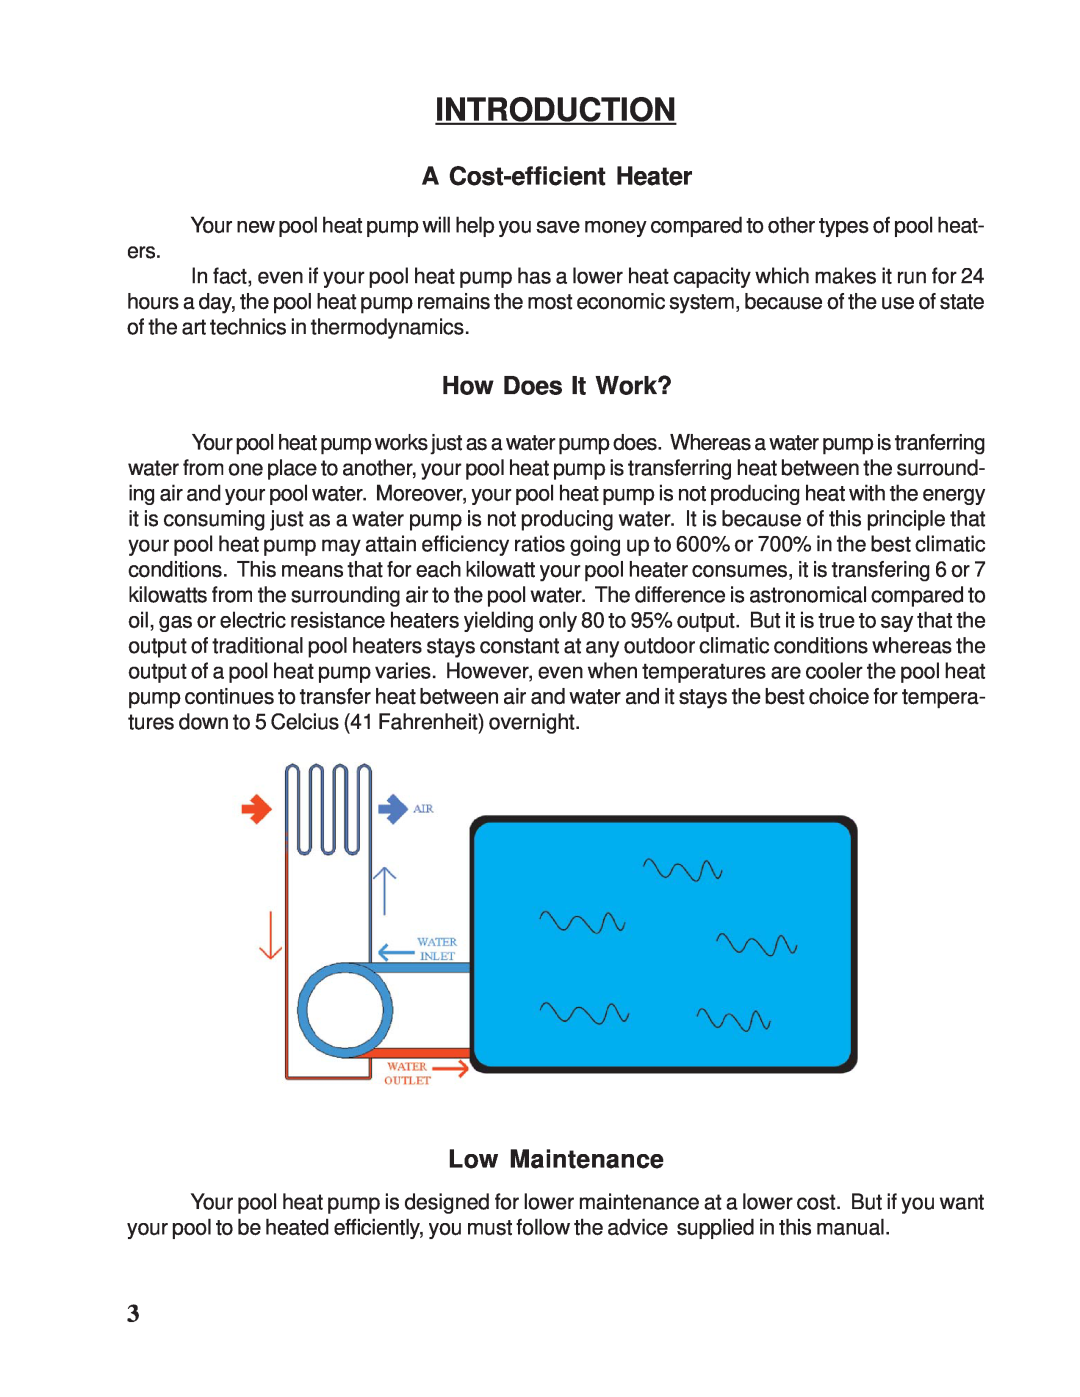 Taylor Pool Heat Pump owner manual Introduction, A Cost-efficient Heater, How Does It Work?, Low Maintenance 